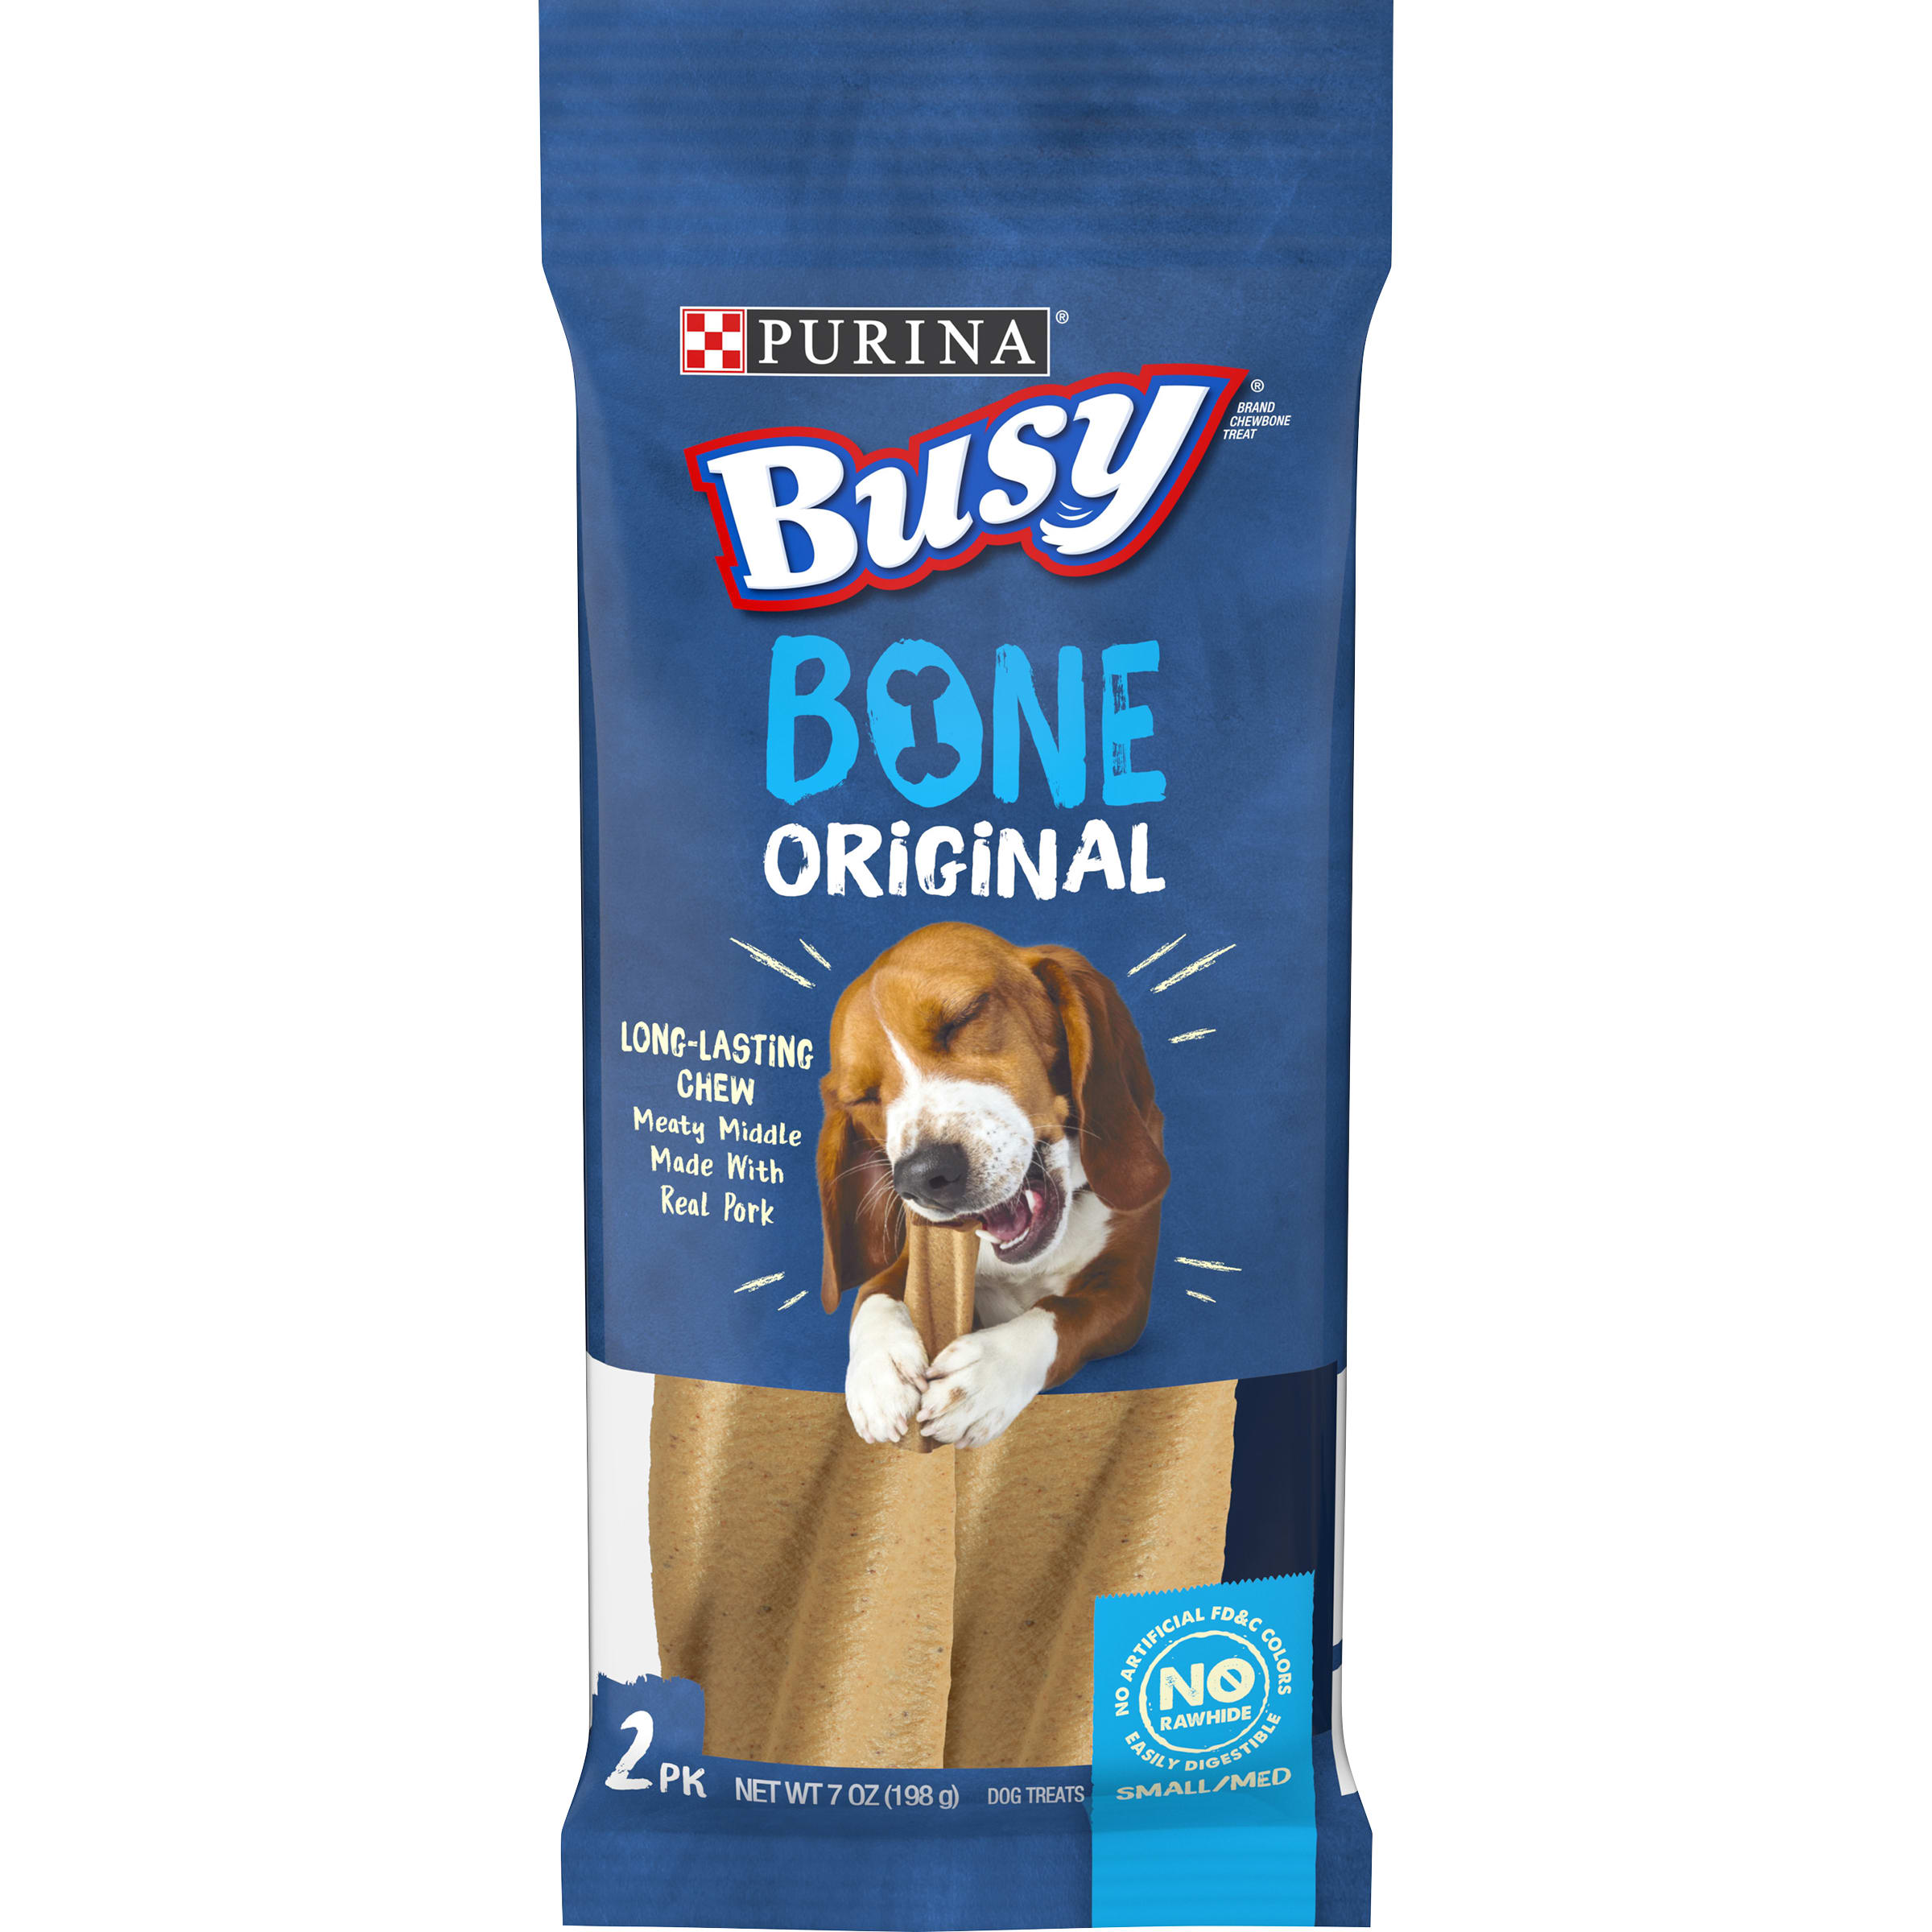 Purina Busy Dog Bones Original Dog Treat Dry Chews, Real Pork for Small & Medium Dogs, 7 oz Pouch (2 Pack) - image 1 of 13